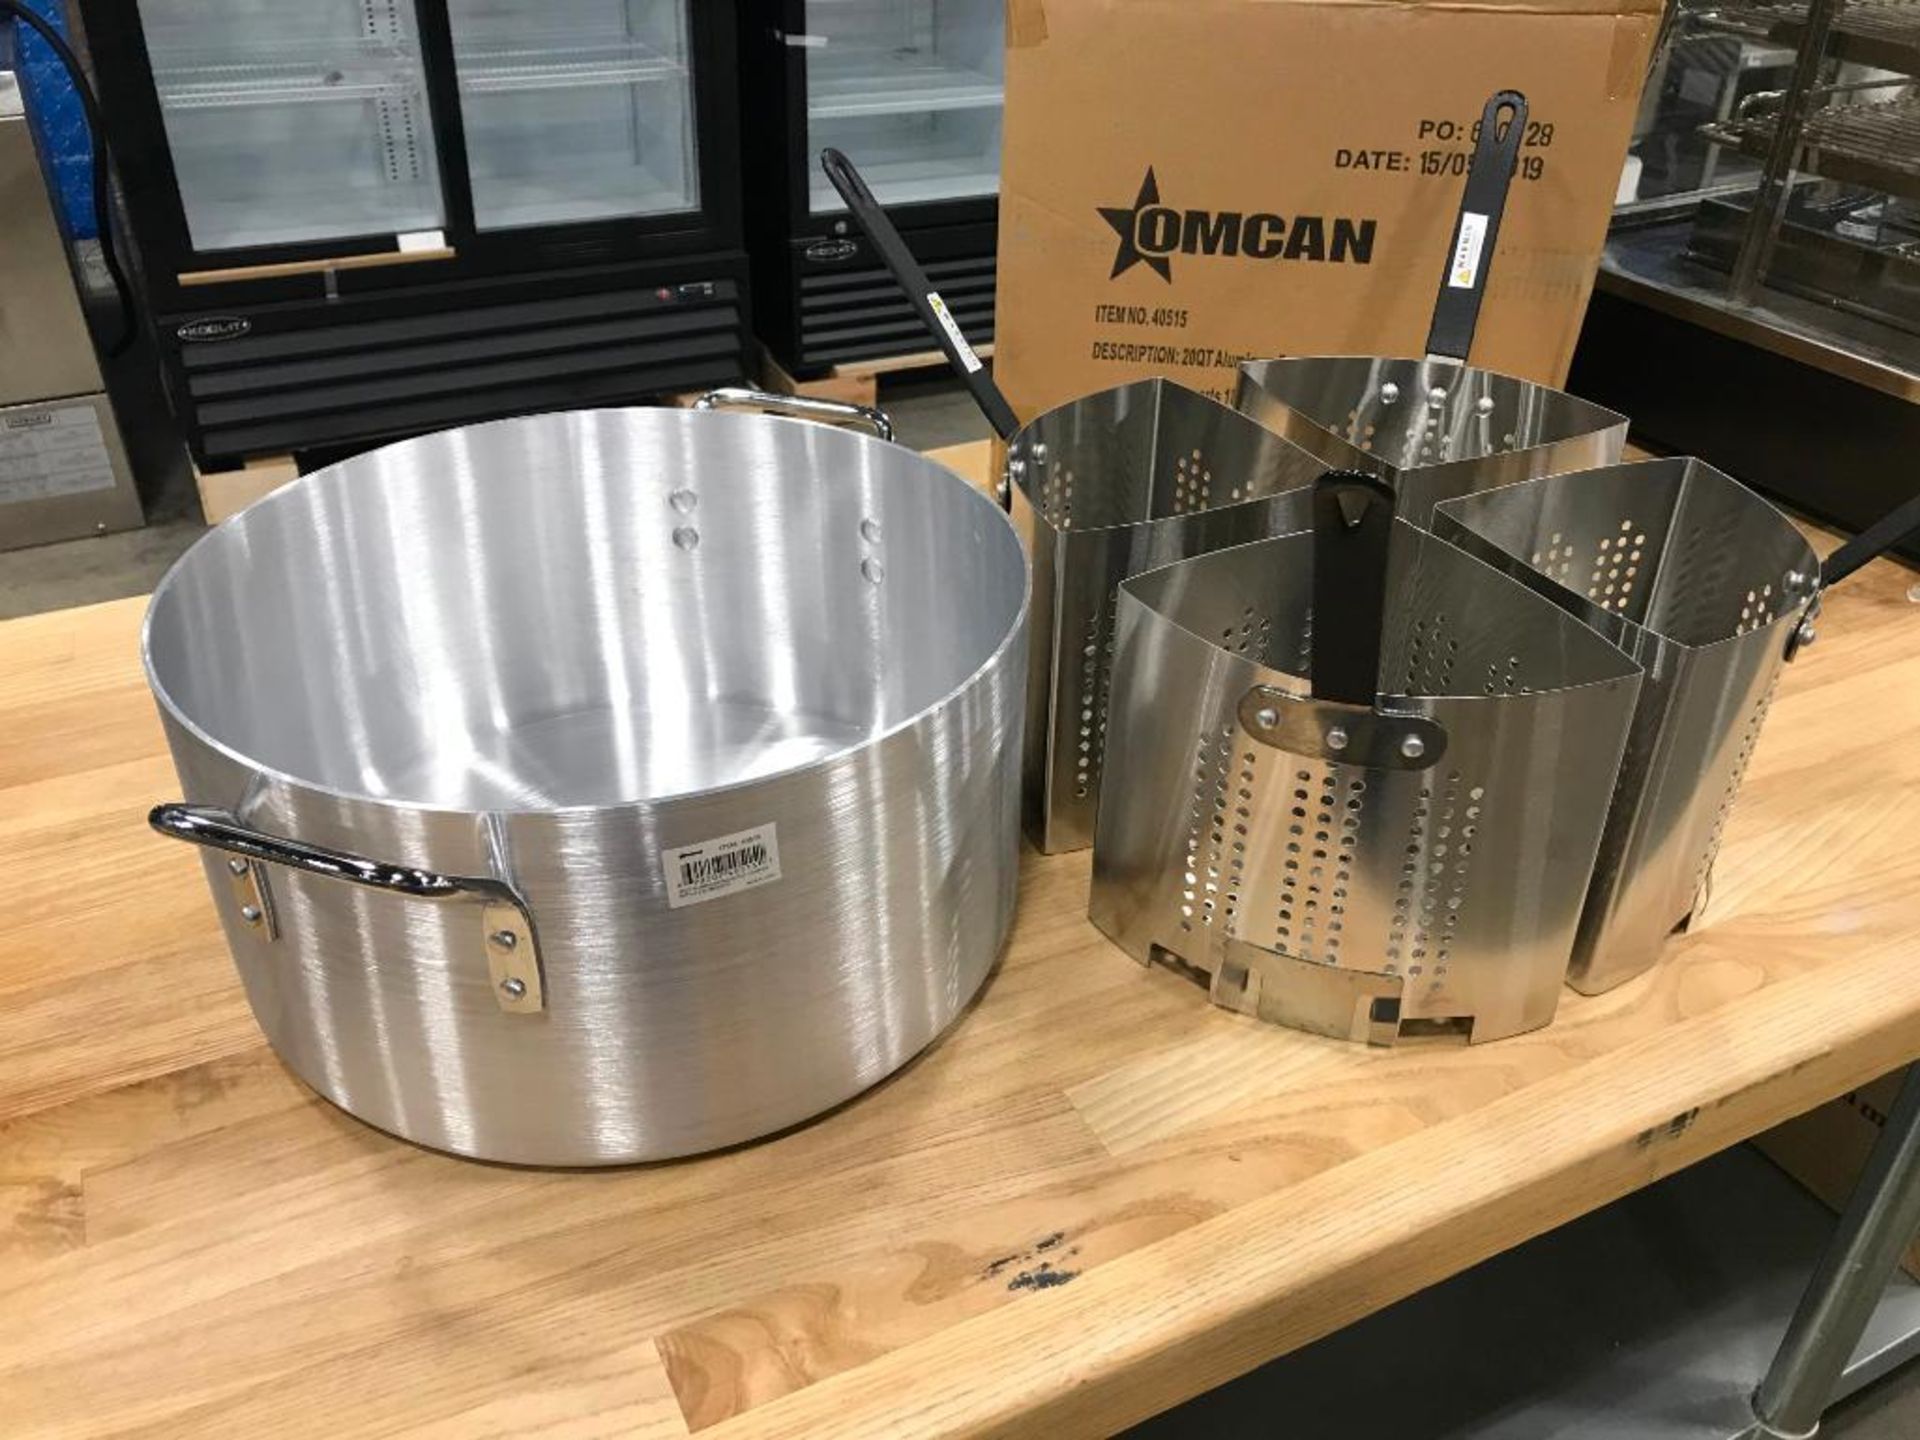 ALUMINUM PASTA COOKER SET, 4 SEPARATE STAINLESS COOKING COMPARTMENTS - Image 3 of 4